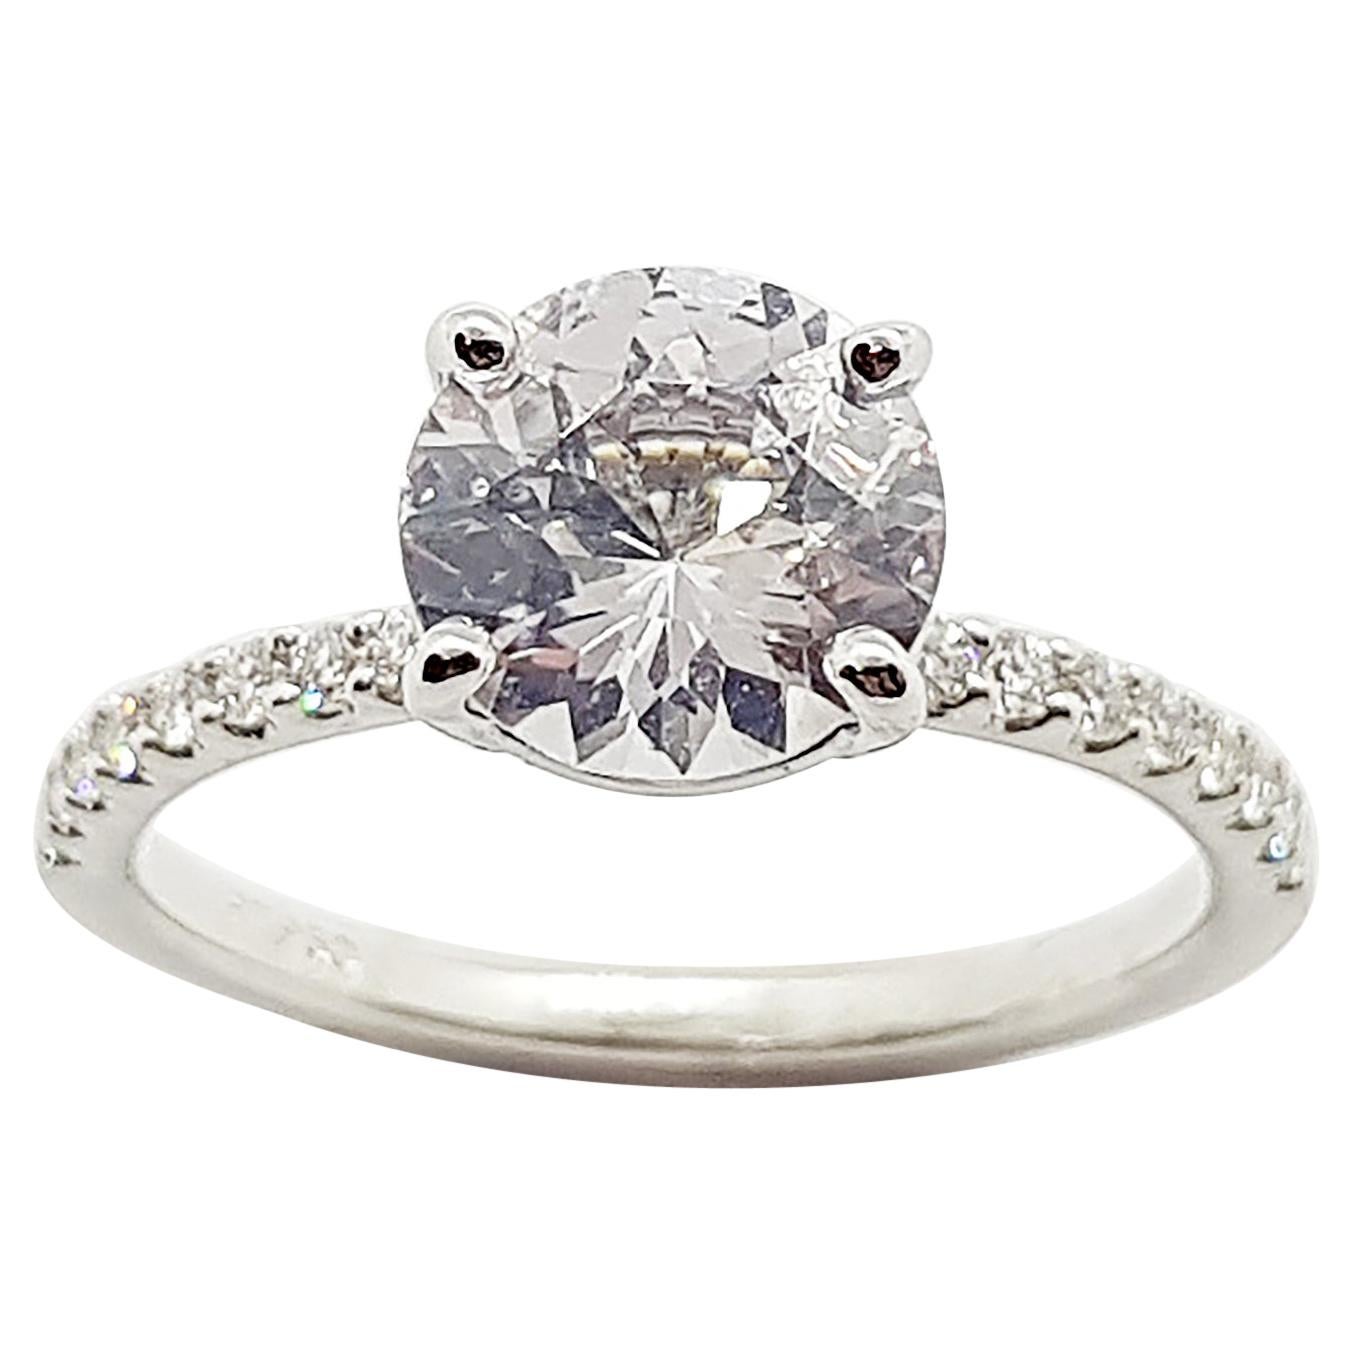 White Sapphire with Diamond Engagement Ring Set in Platinum 950 Settings